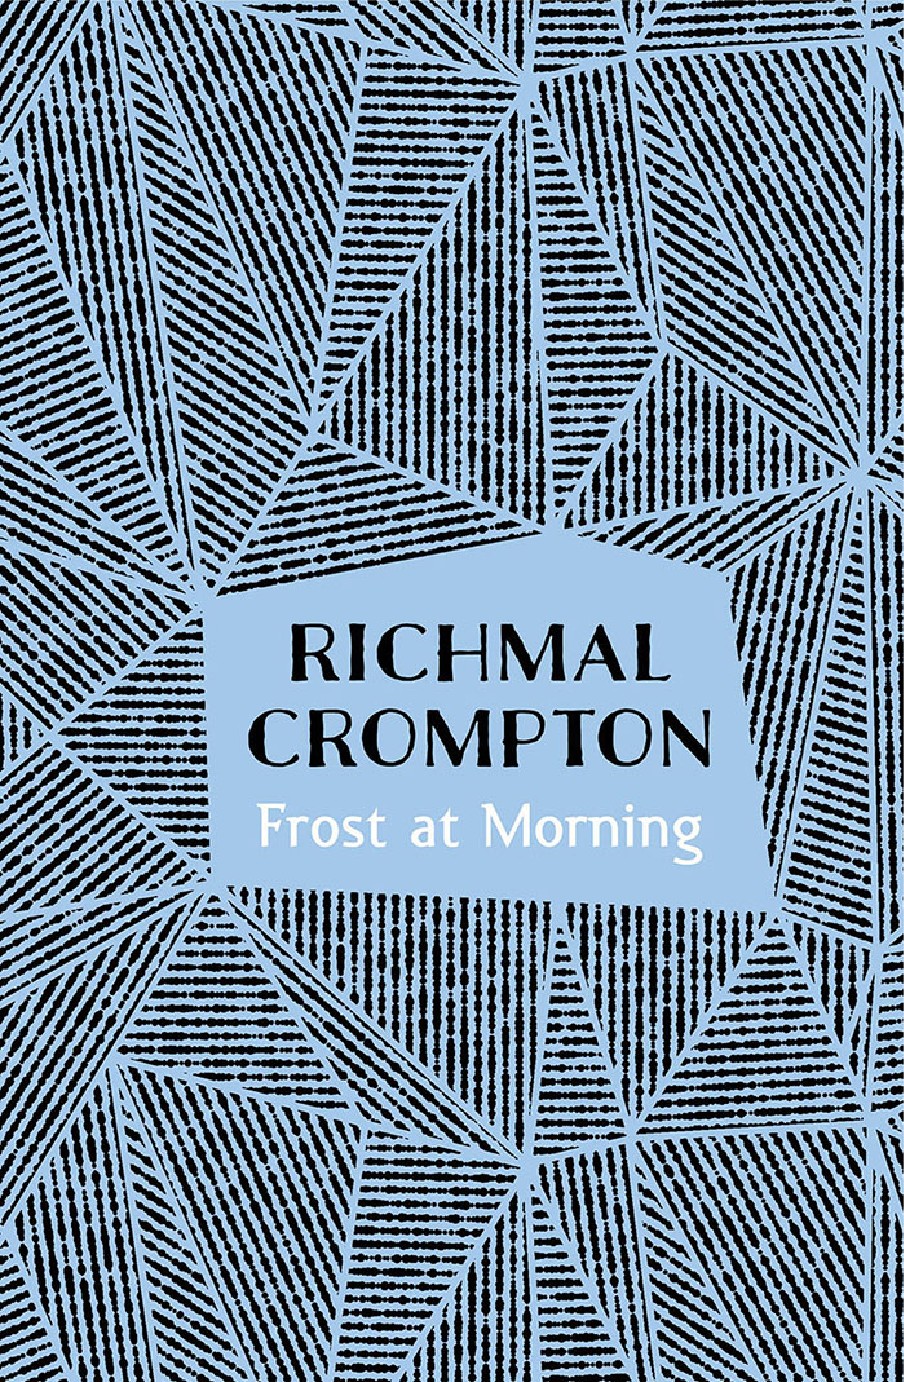 Frost at Morning